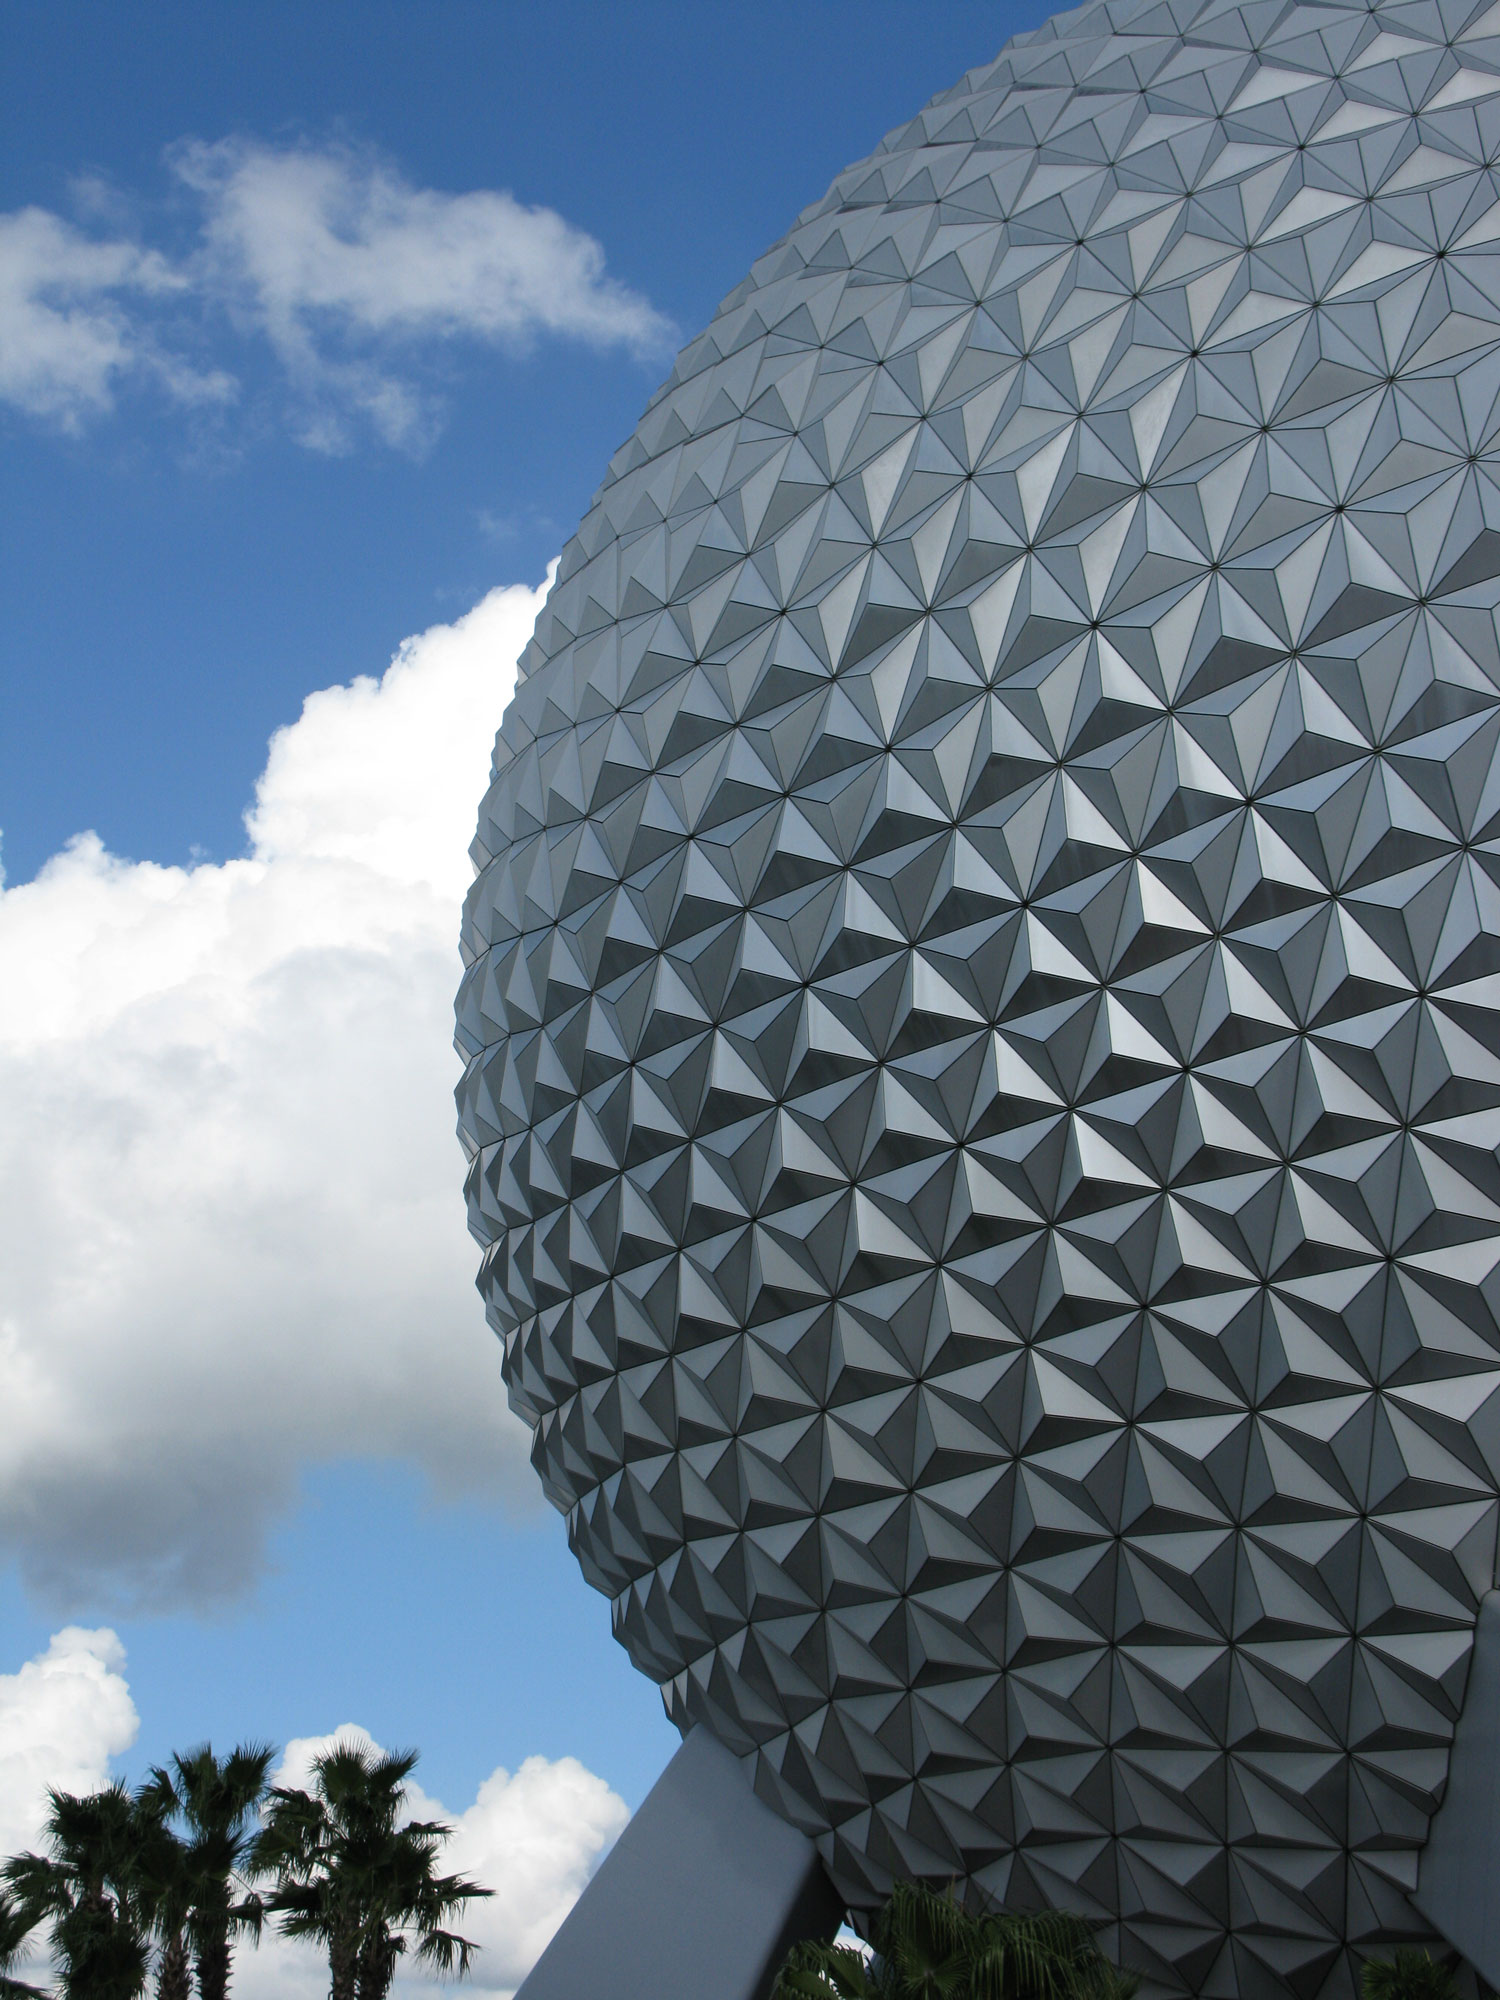 Spaceship Earth with clouds